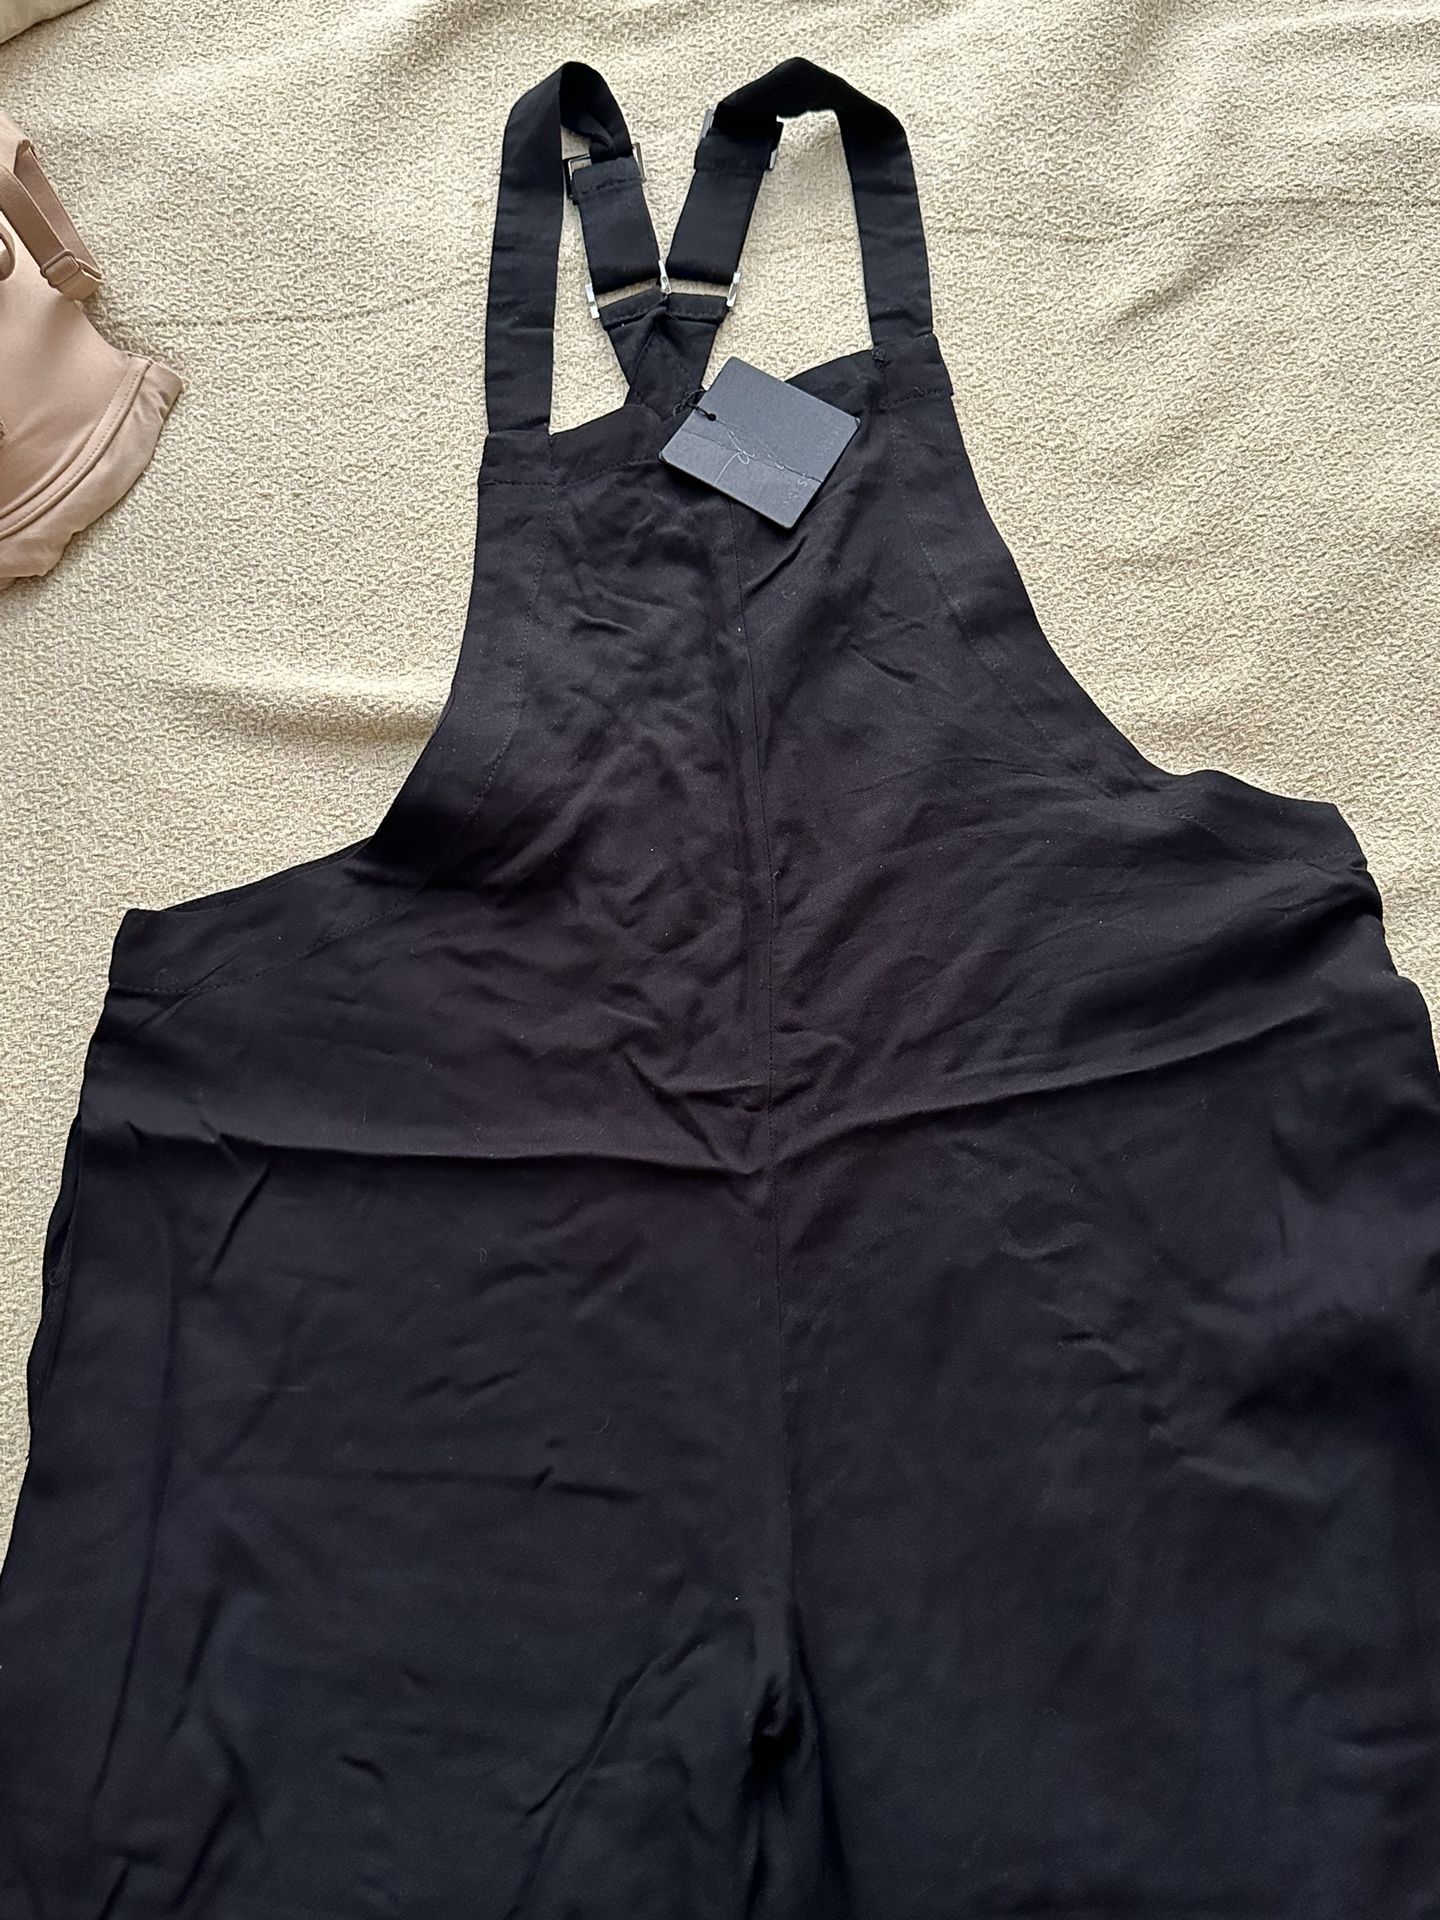 Woman's Spring/Summer Overalls